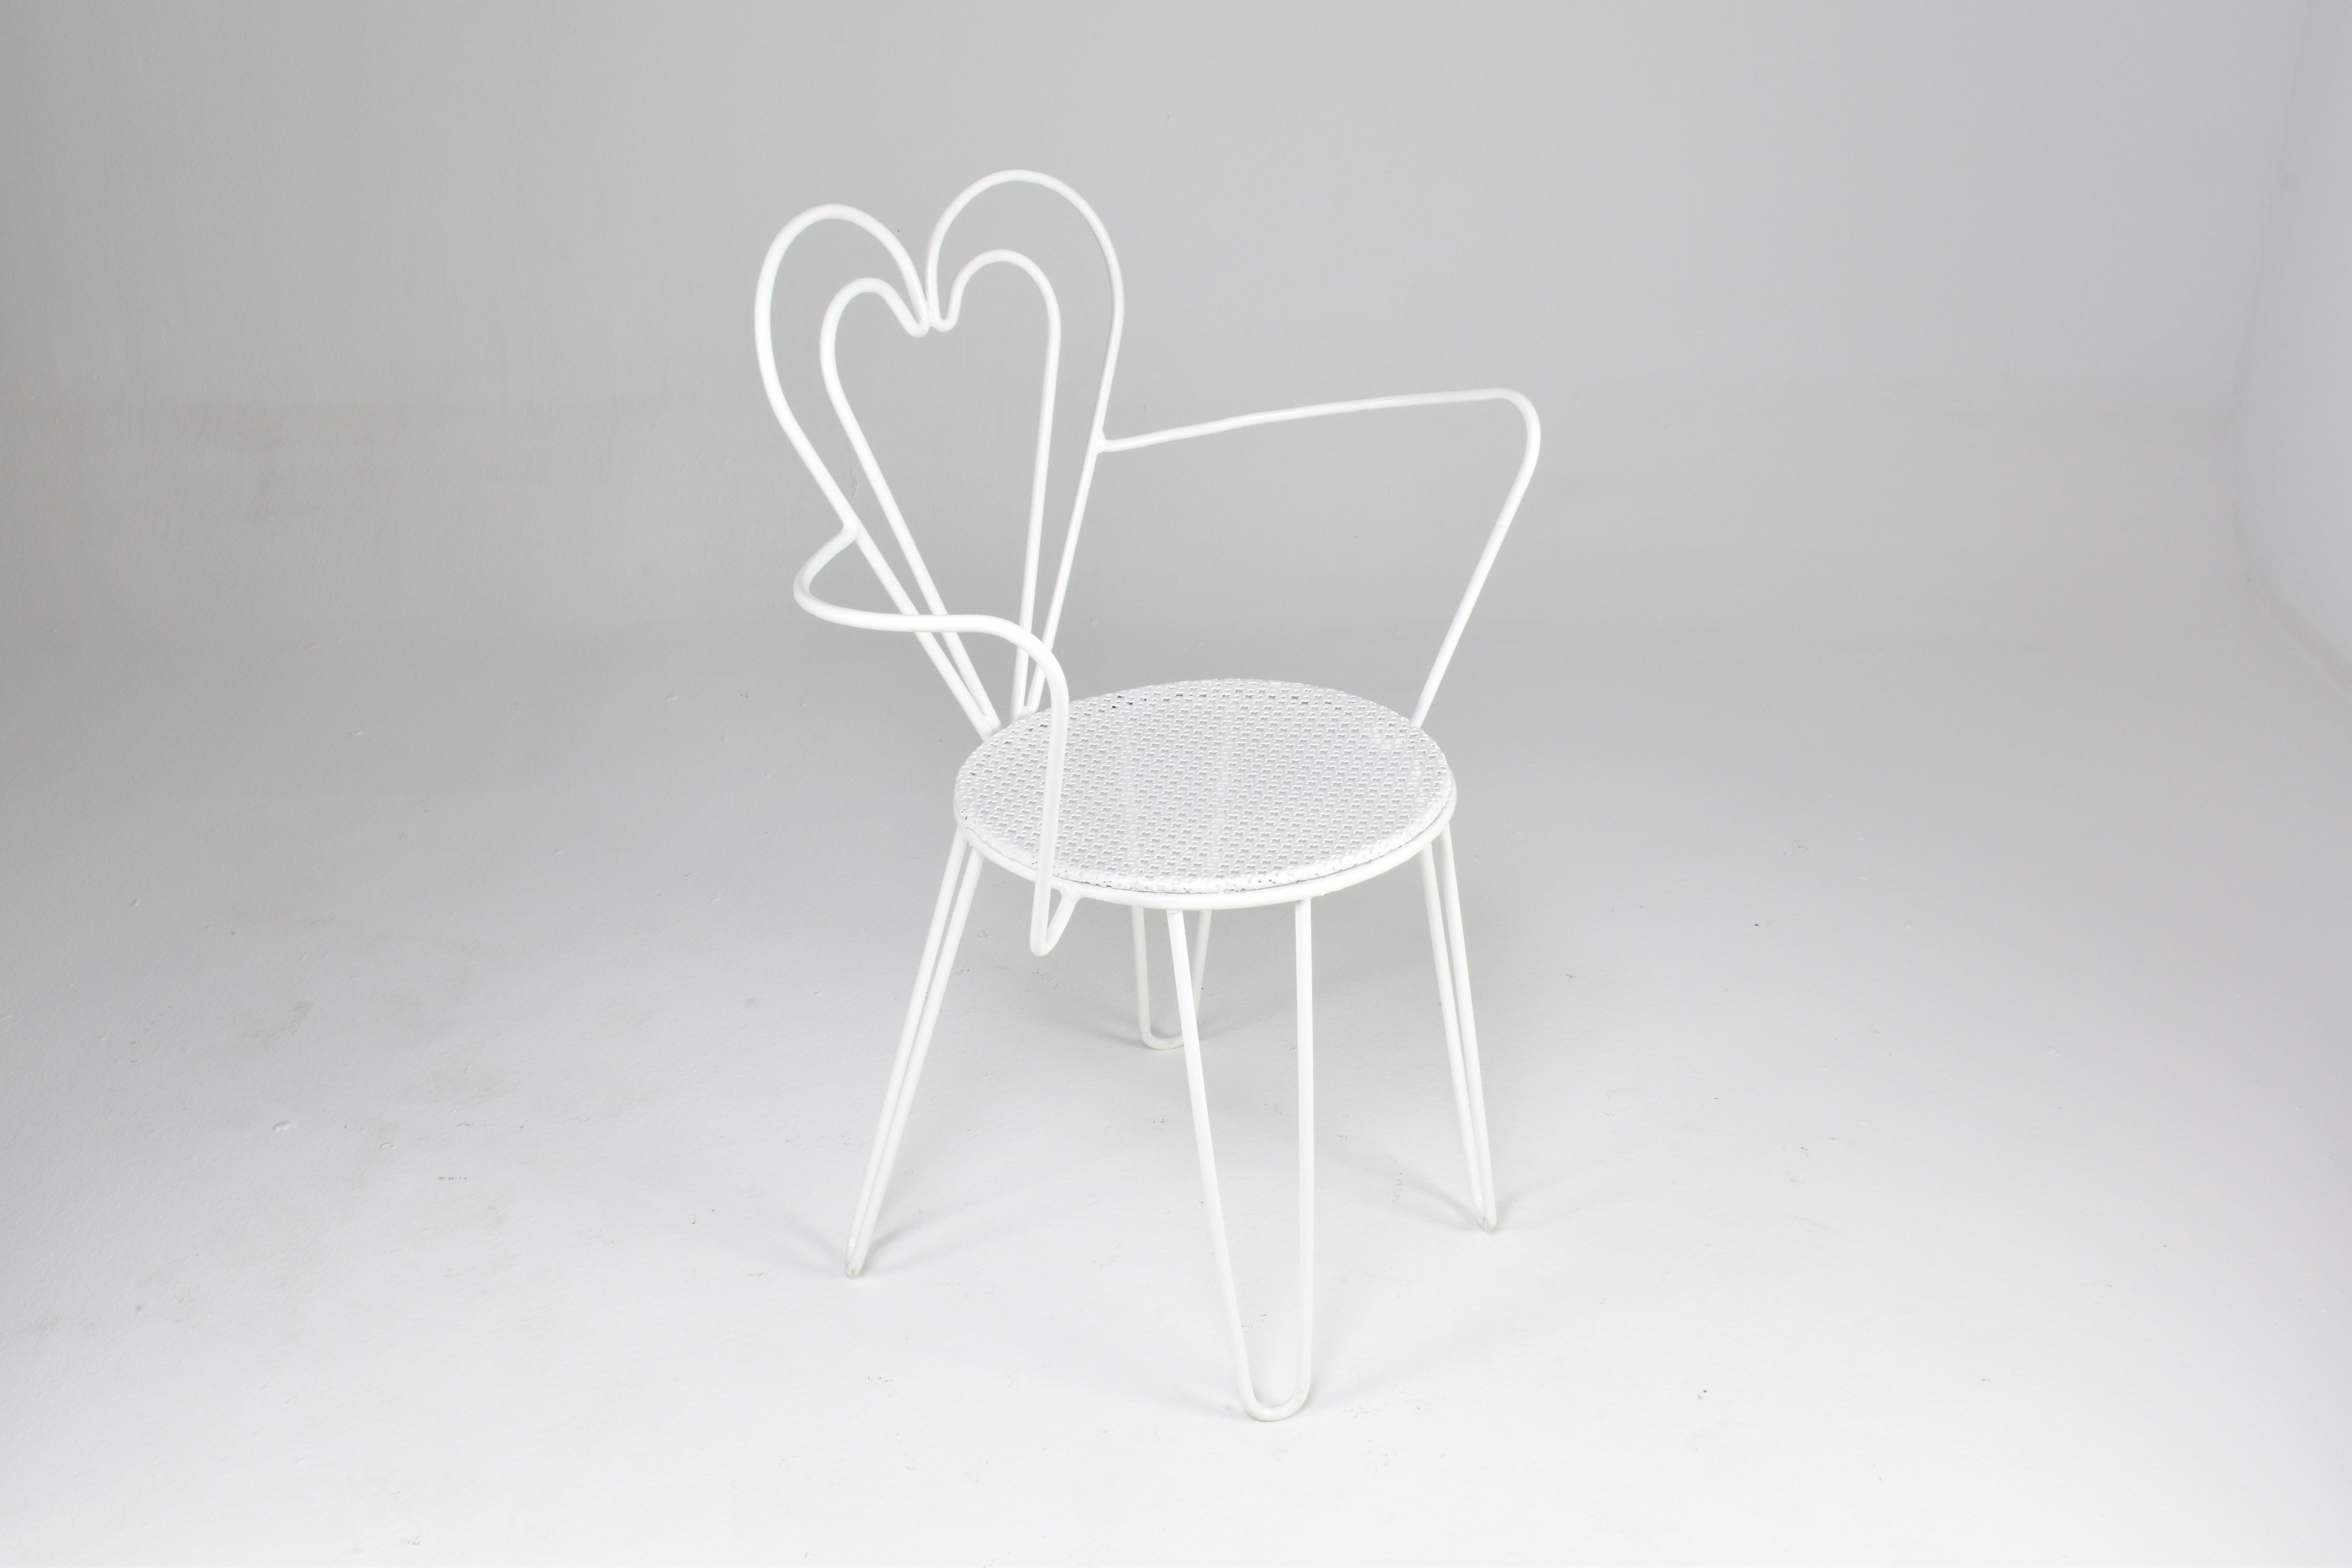 Mid-20th Century French Metal Heart Chairs by Mathieu Matégot, 1950s For Sale